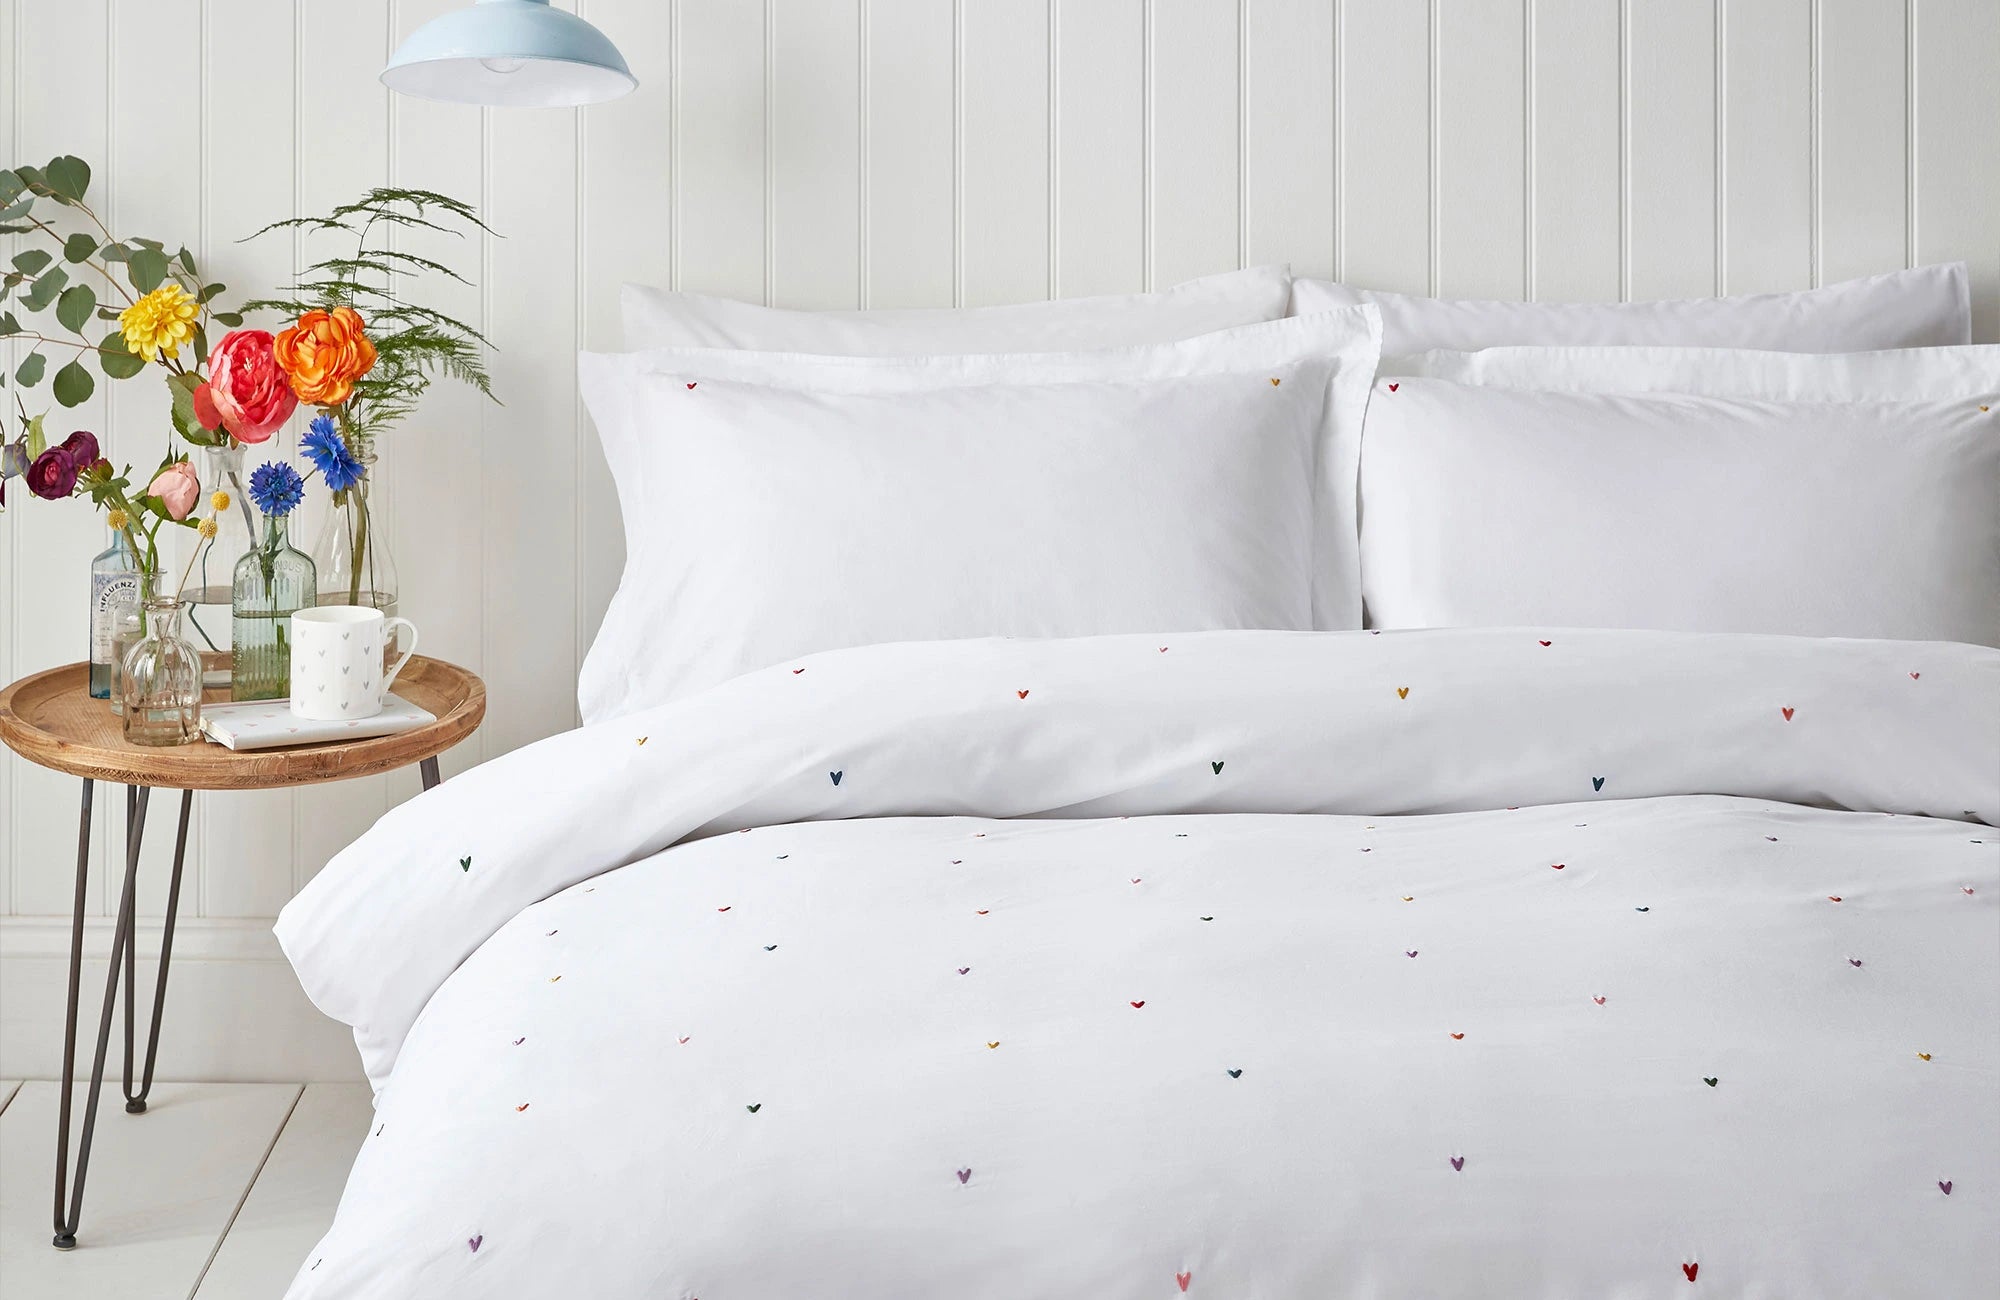 How to Choose the Correct Bed Sheet Size